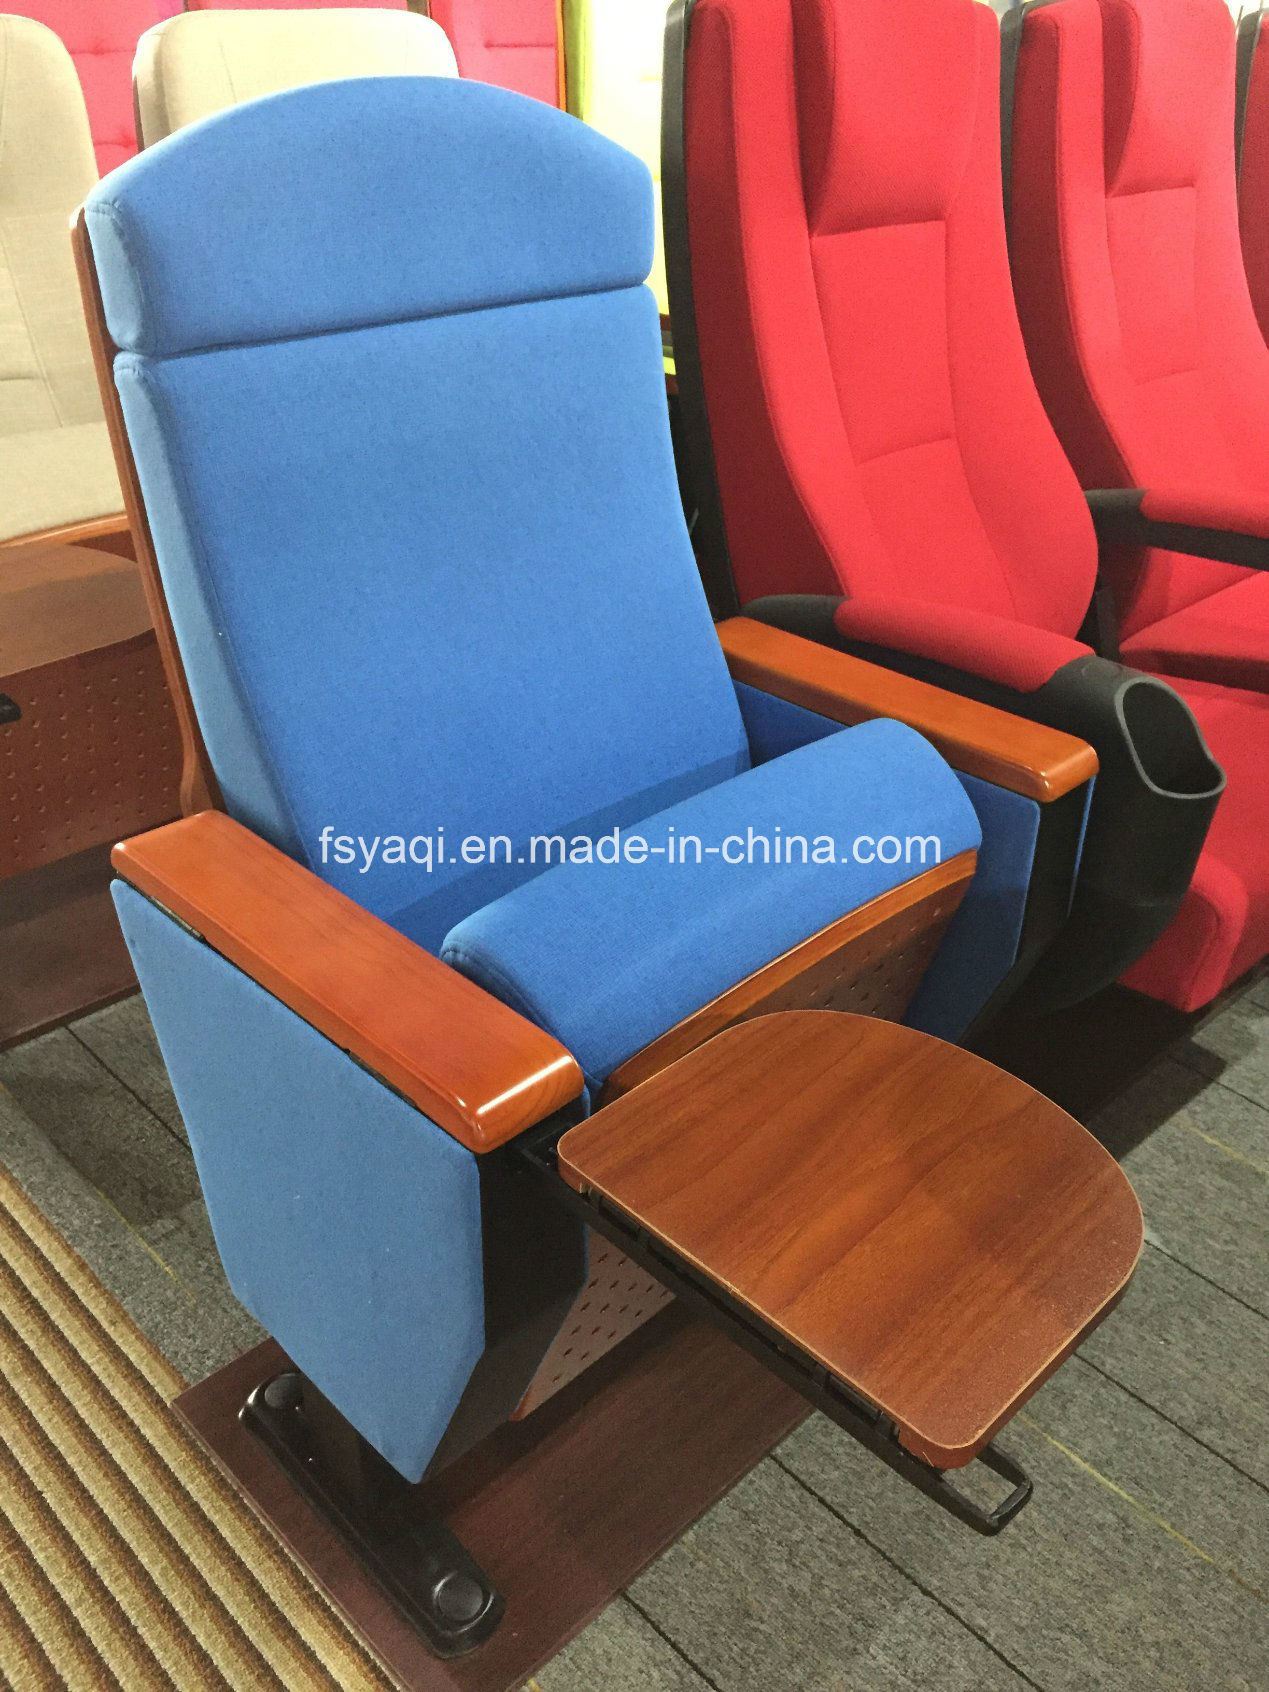 2018 New Design Factory Price Folding Conference Connecting Church Chair Upholstered Chair for Church (YA-01F)